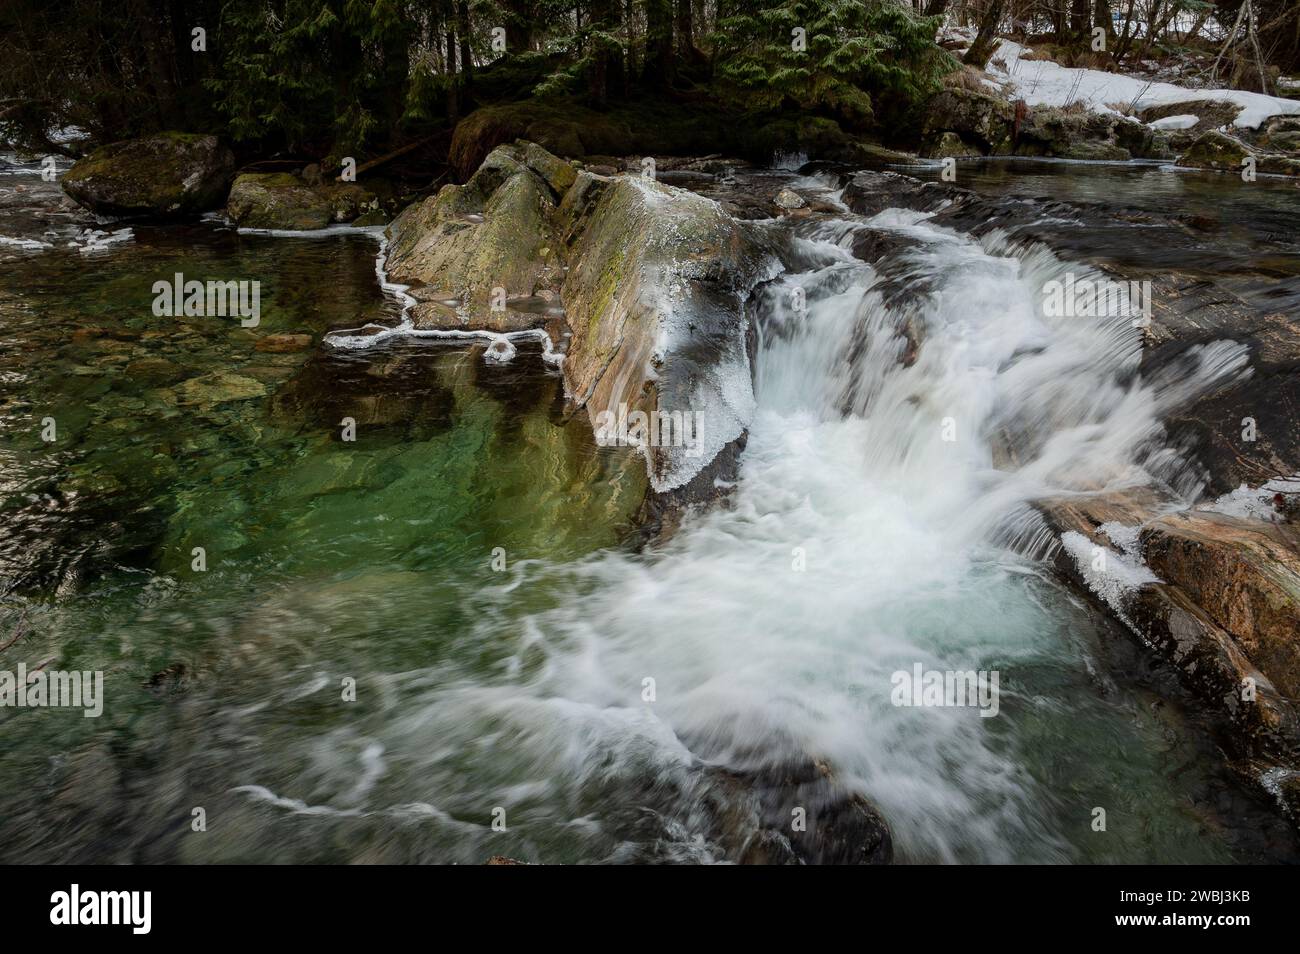 A serene mountain stream flows over moss-covered rocks with patches of snow clinging to the forested banks. Stock Photo